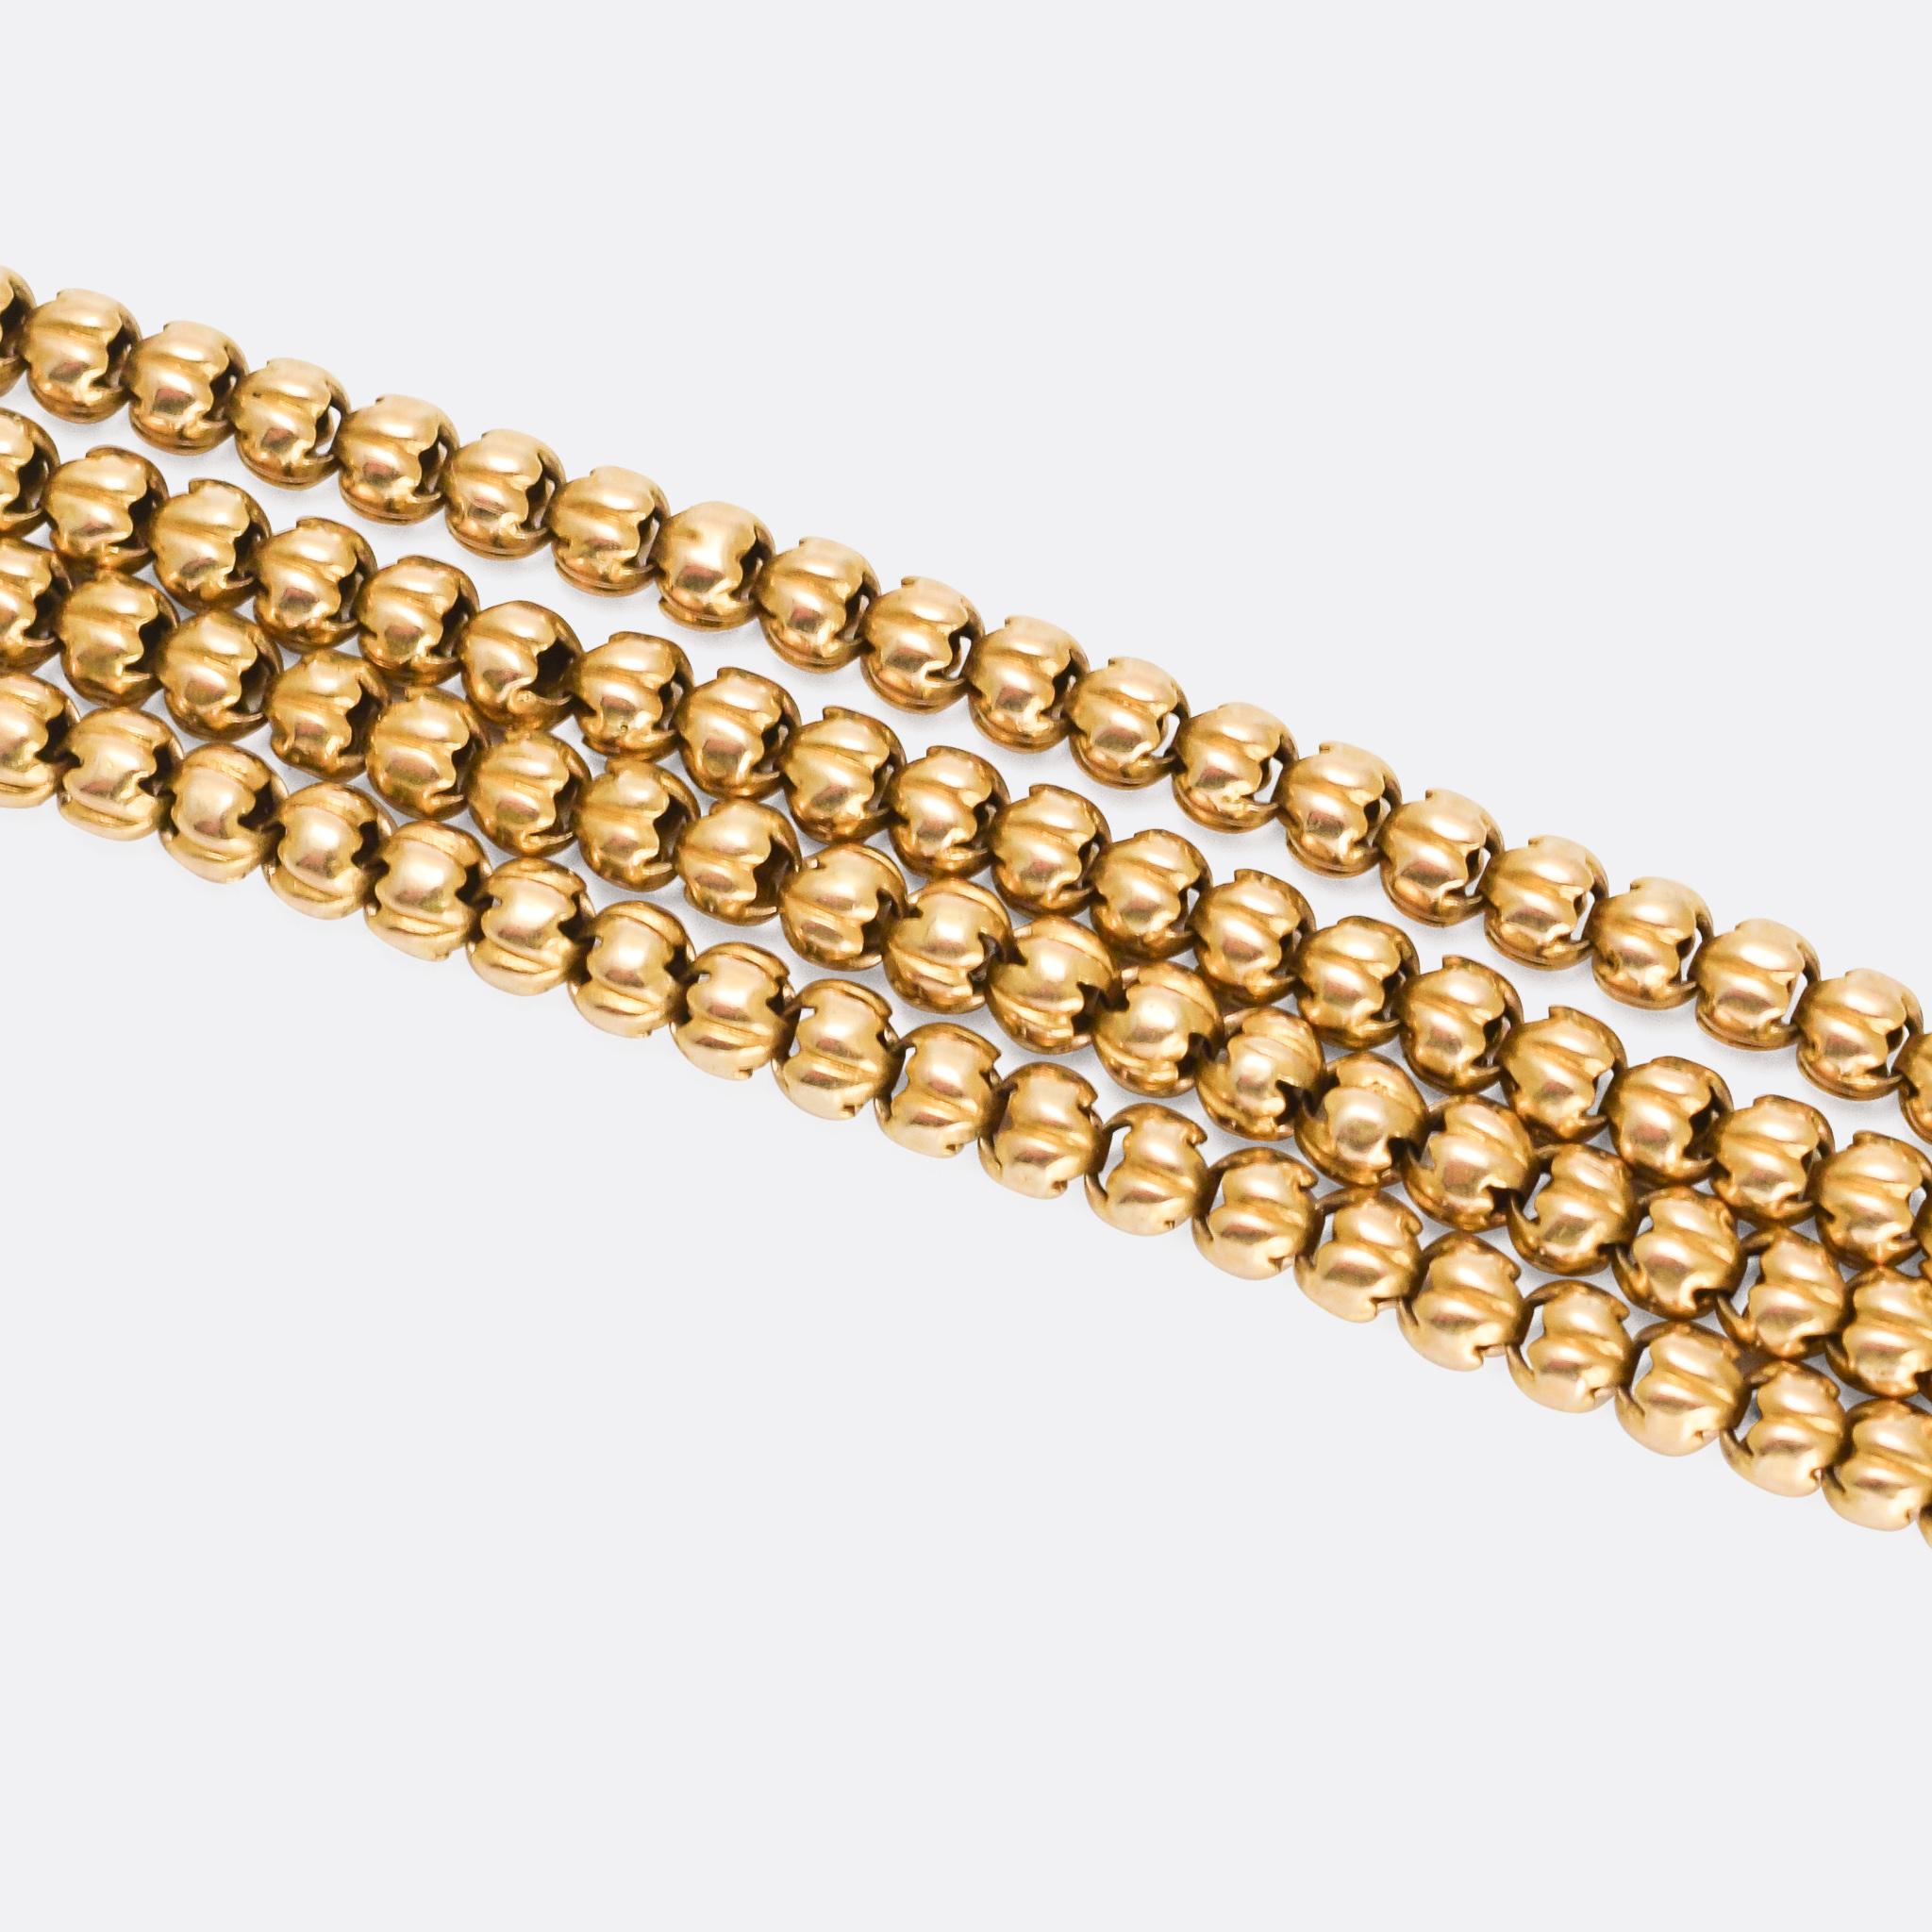 A fine antique guard chain with fancy ball links and unusually modelled in 18 karat gold. It's long, at 72 inches, and very substantial at 45.4 grams. It dates from the latter half of the 19th Century, and remains complete with the original swivel